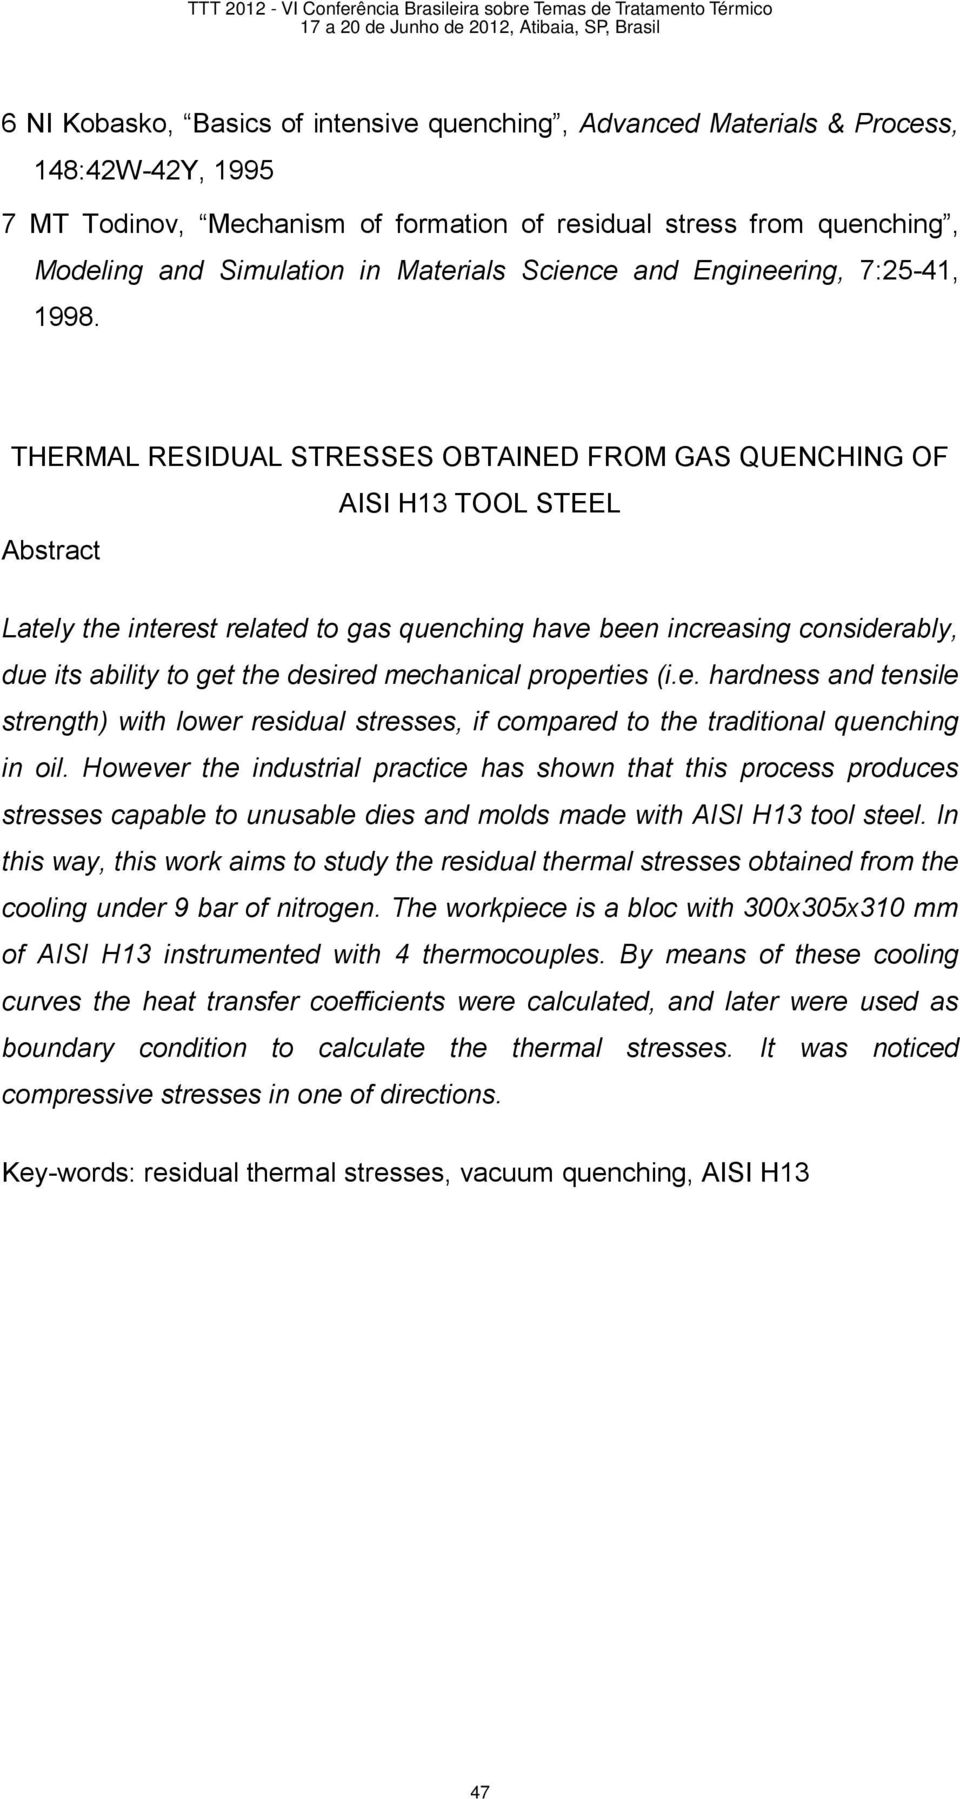 THERMAL RESIDUAL STRESSES OBTAINED FROM GAS QUENCHING OF Abstract AISI H13 TOOL STEEL Lately the interest related to gas quenching have been increasing considerably, due its ability to get the